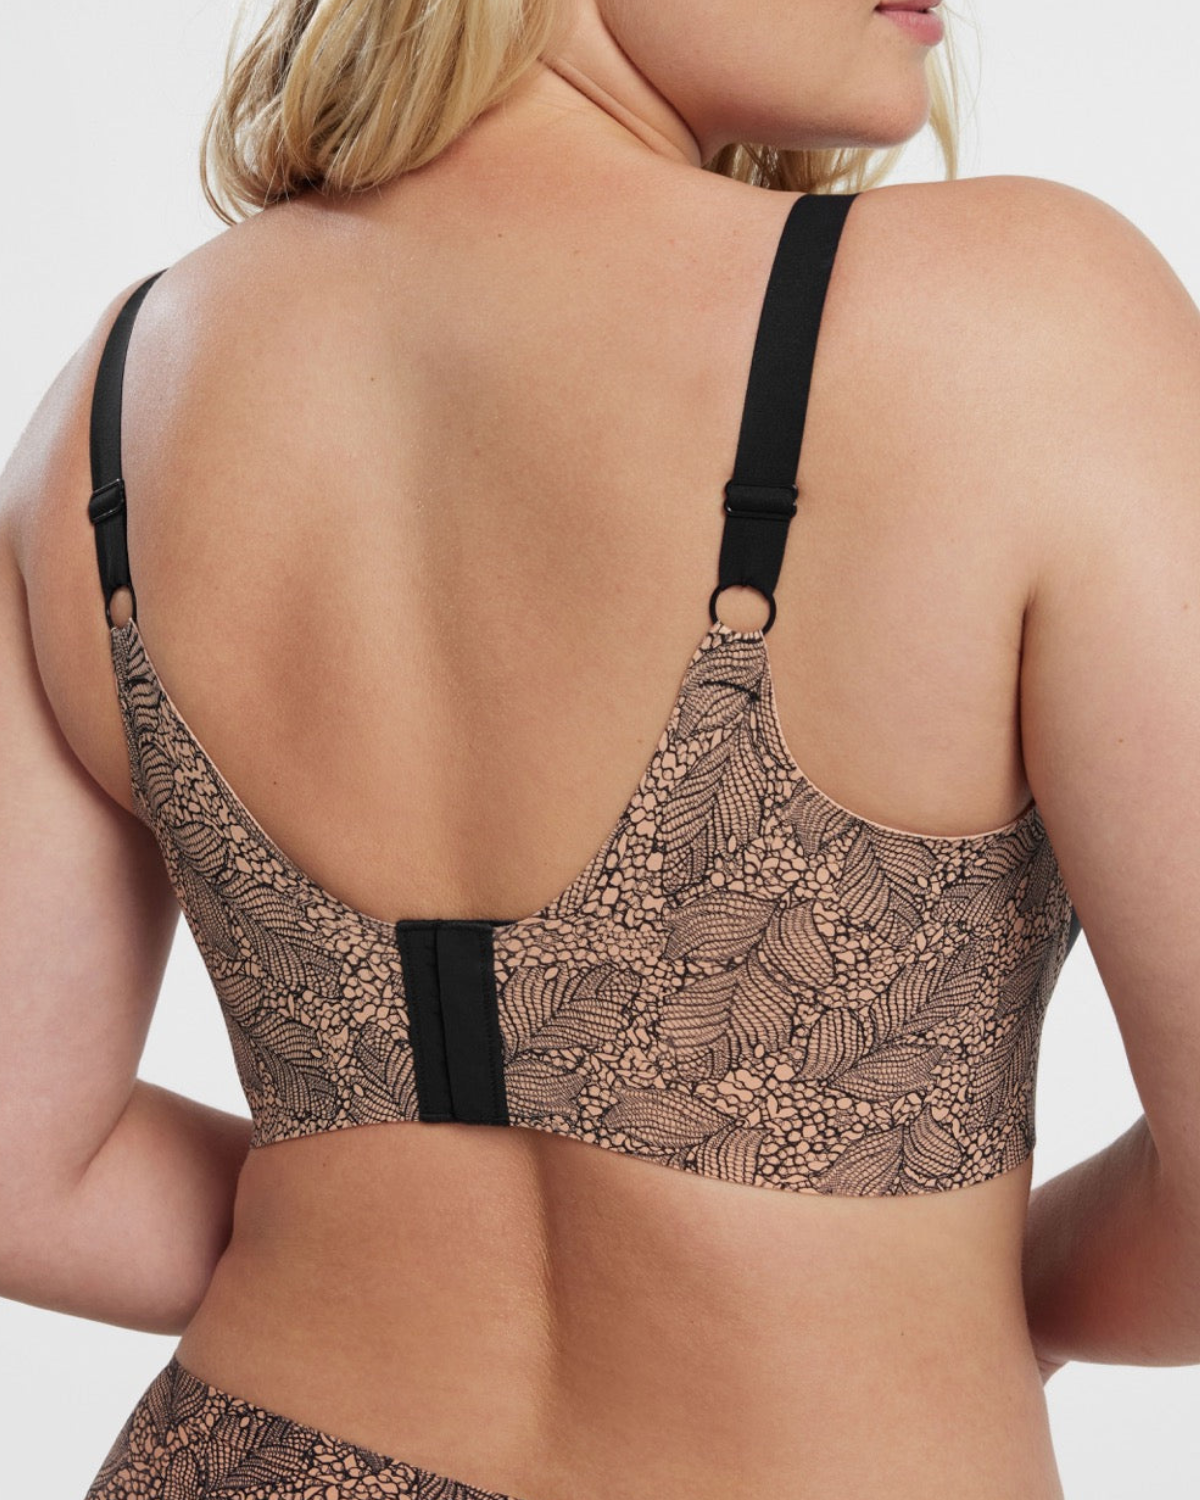 Evelyn & Bobbie Wire Free Beyond Bra (More colors available)